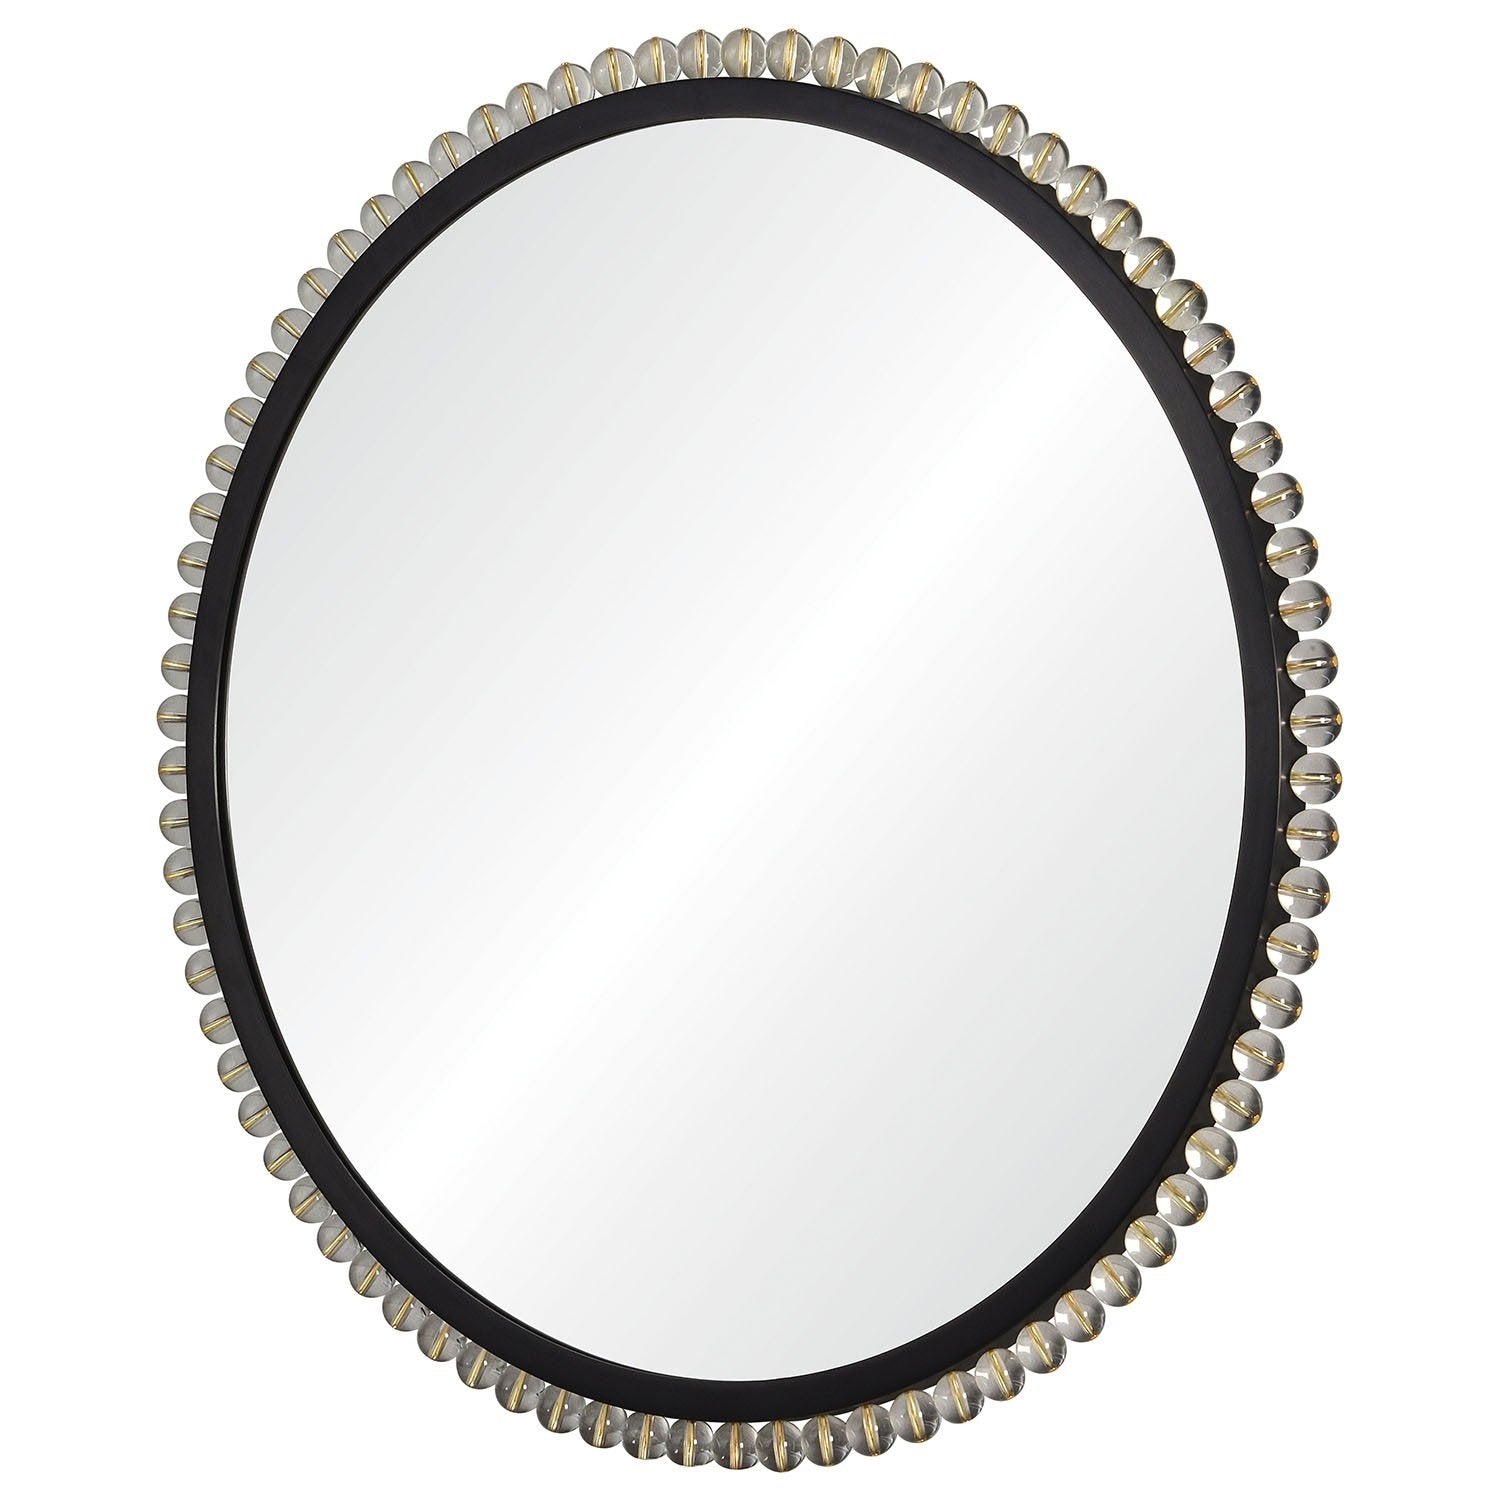 Mirror Image Home - Perle Round Wall Mirror by Jamie Drake | Fig Linens